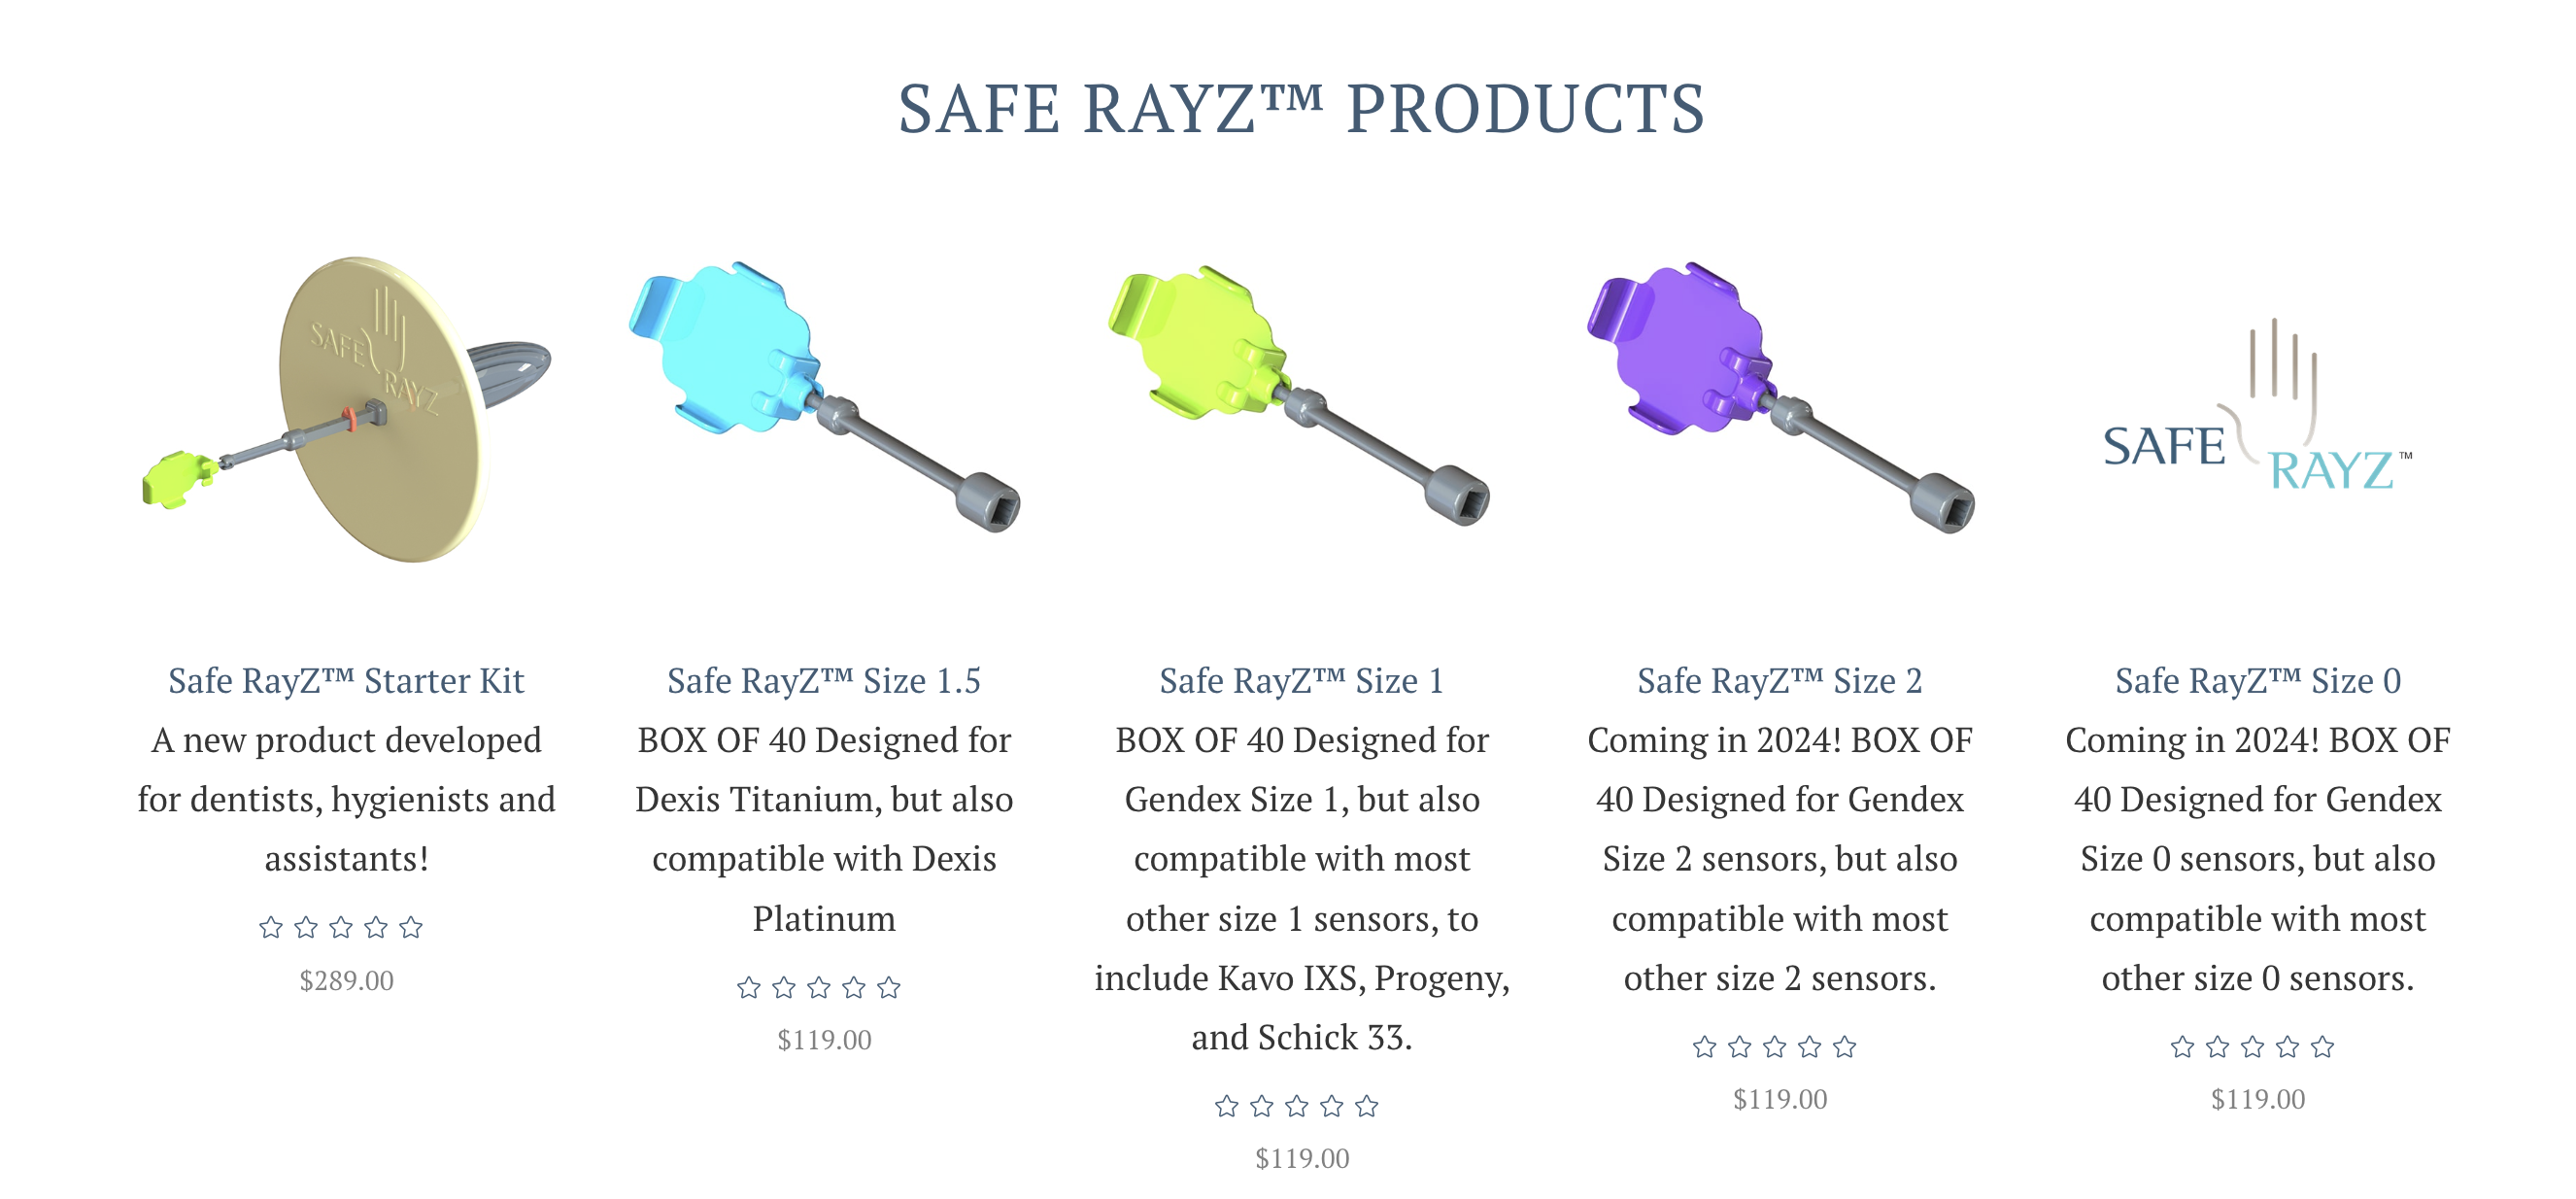 SAFE RAYZ™ PRODUCTS